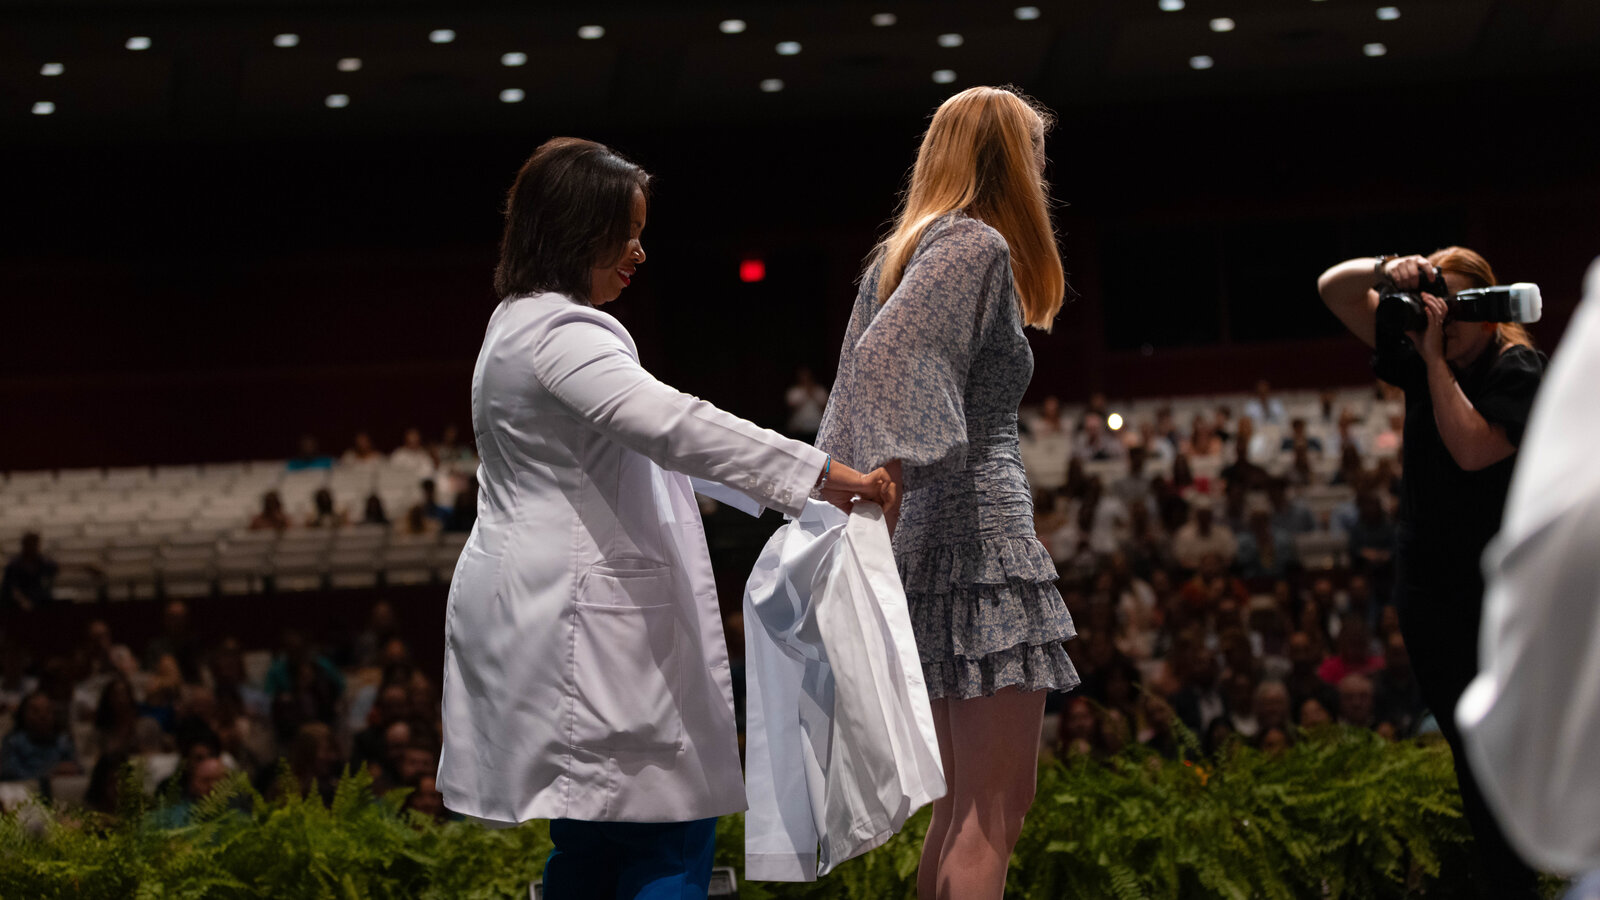 Student receives her white coat at the inaugural School of Medicine white coat ceremony